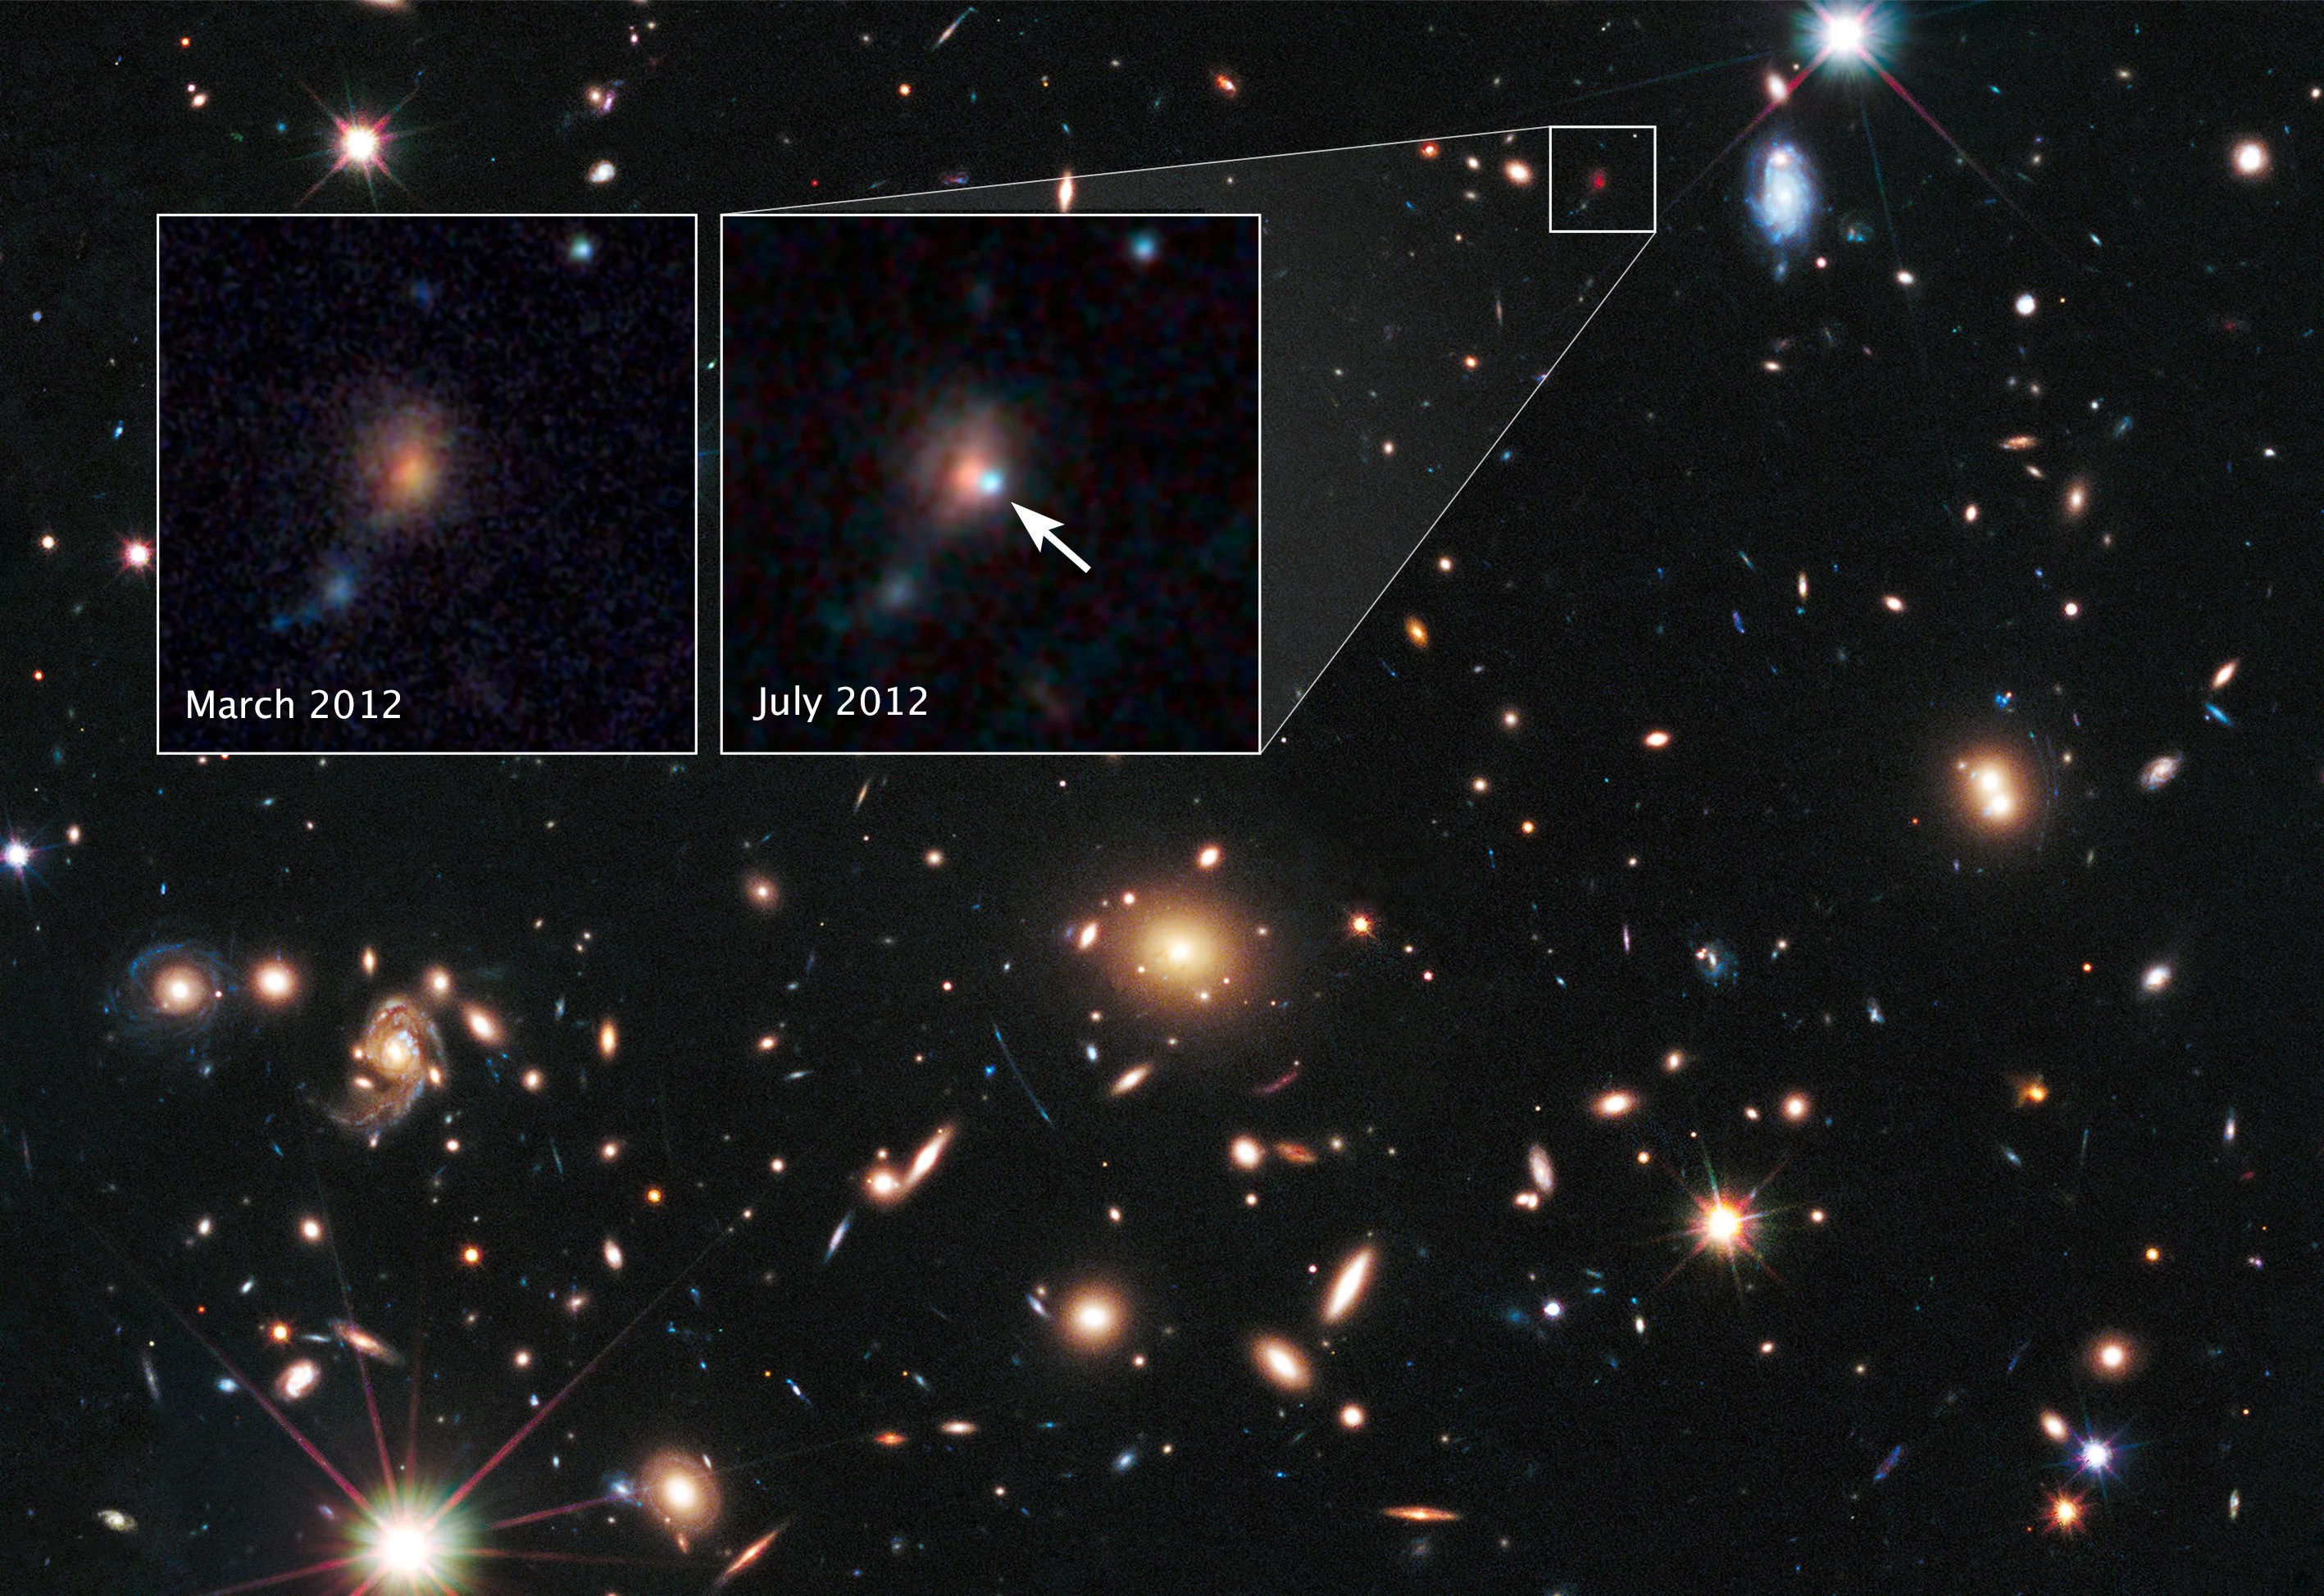 Remote supernova magnified by massive galaxy cluster macsj1720, with two inset images providing a closer look